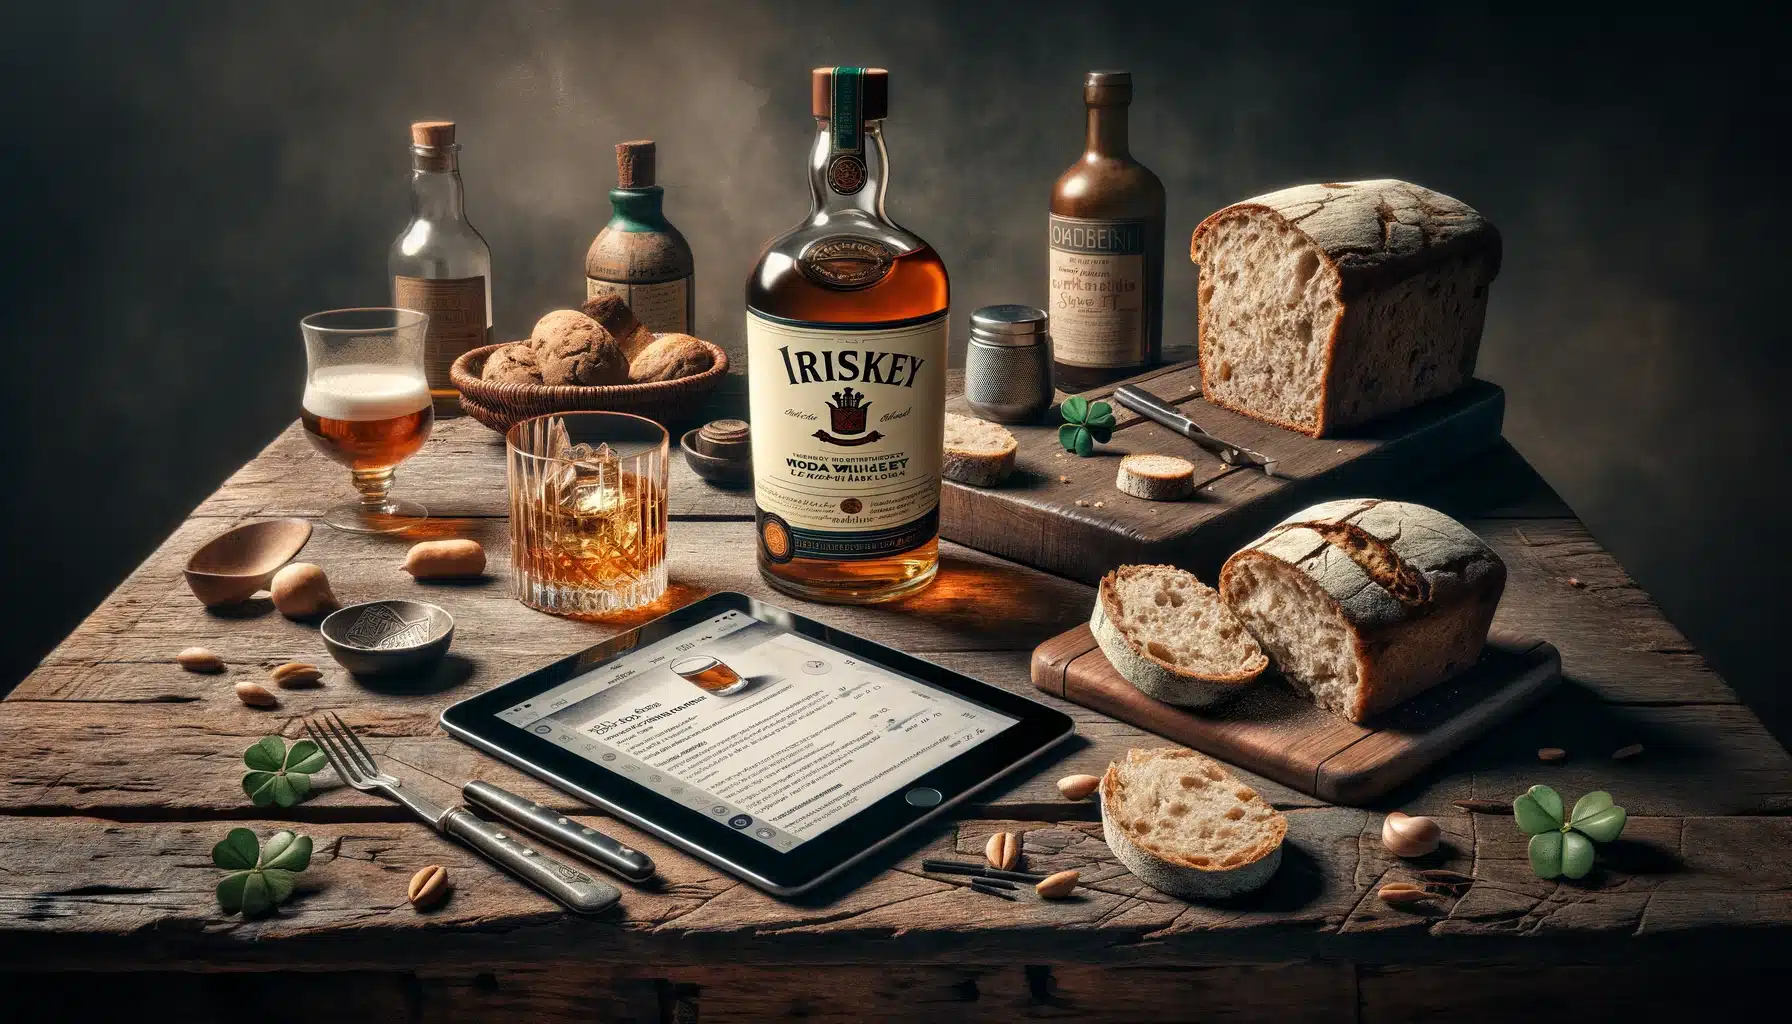 This image depicting a still life of traditional Irish ingredients for St. Patrick's Day on a rustic wooden table, including whiskey, Irish soda bread, and a modern tablet displaying an AI-generated cocktail recipe